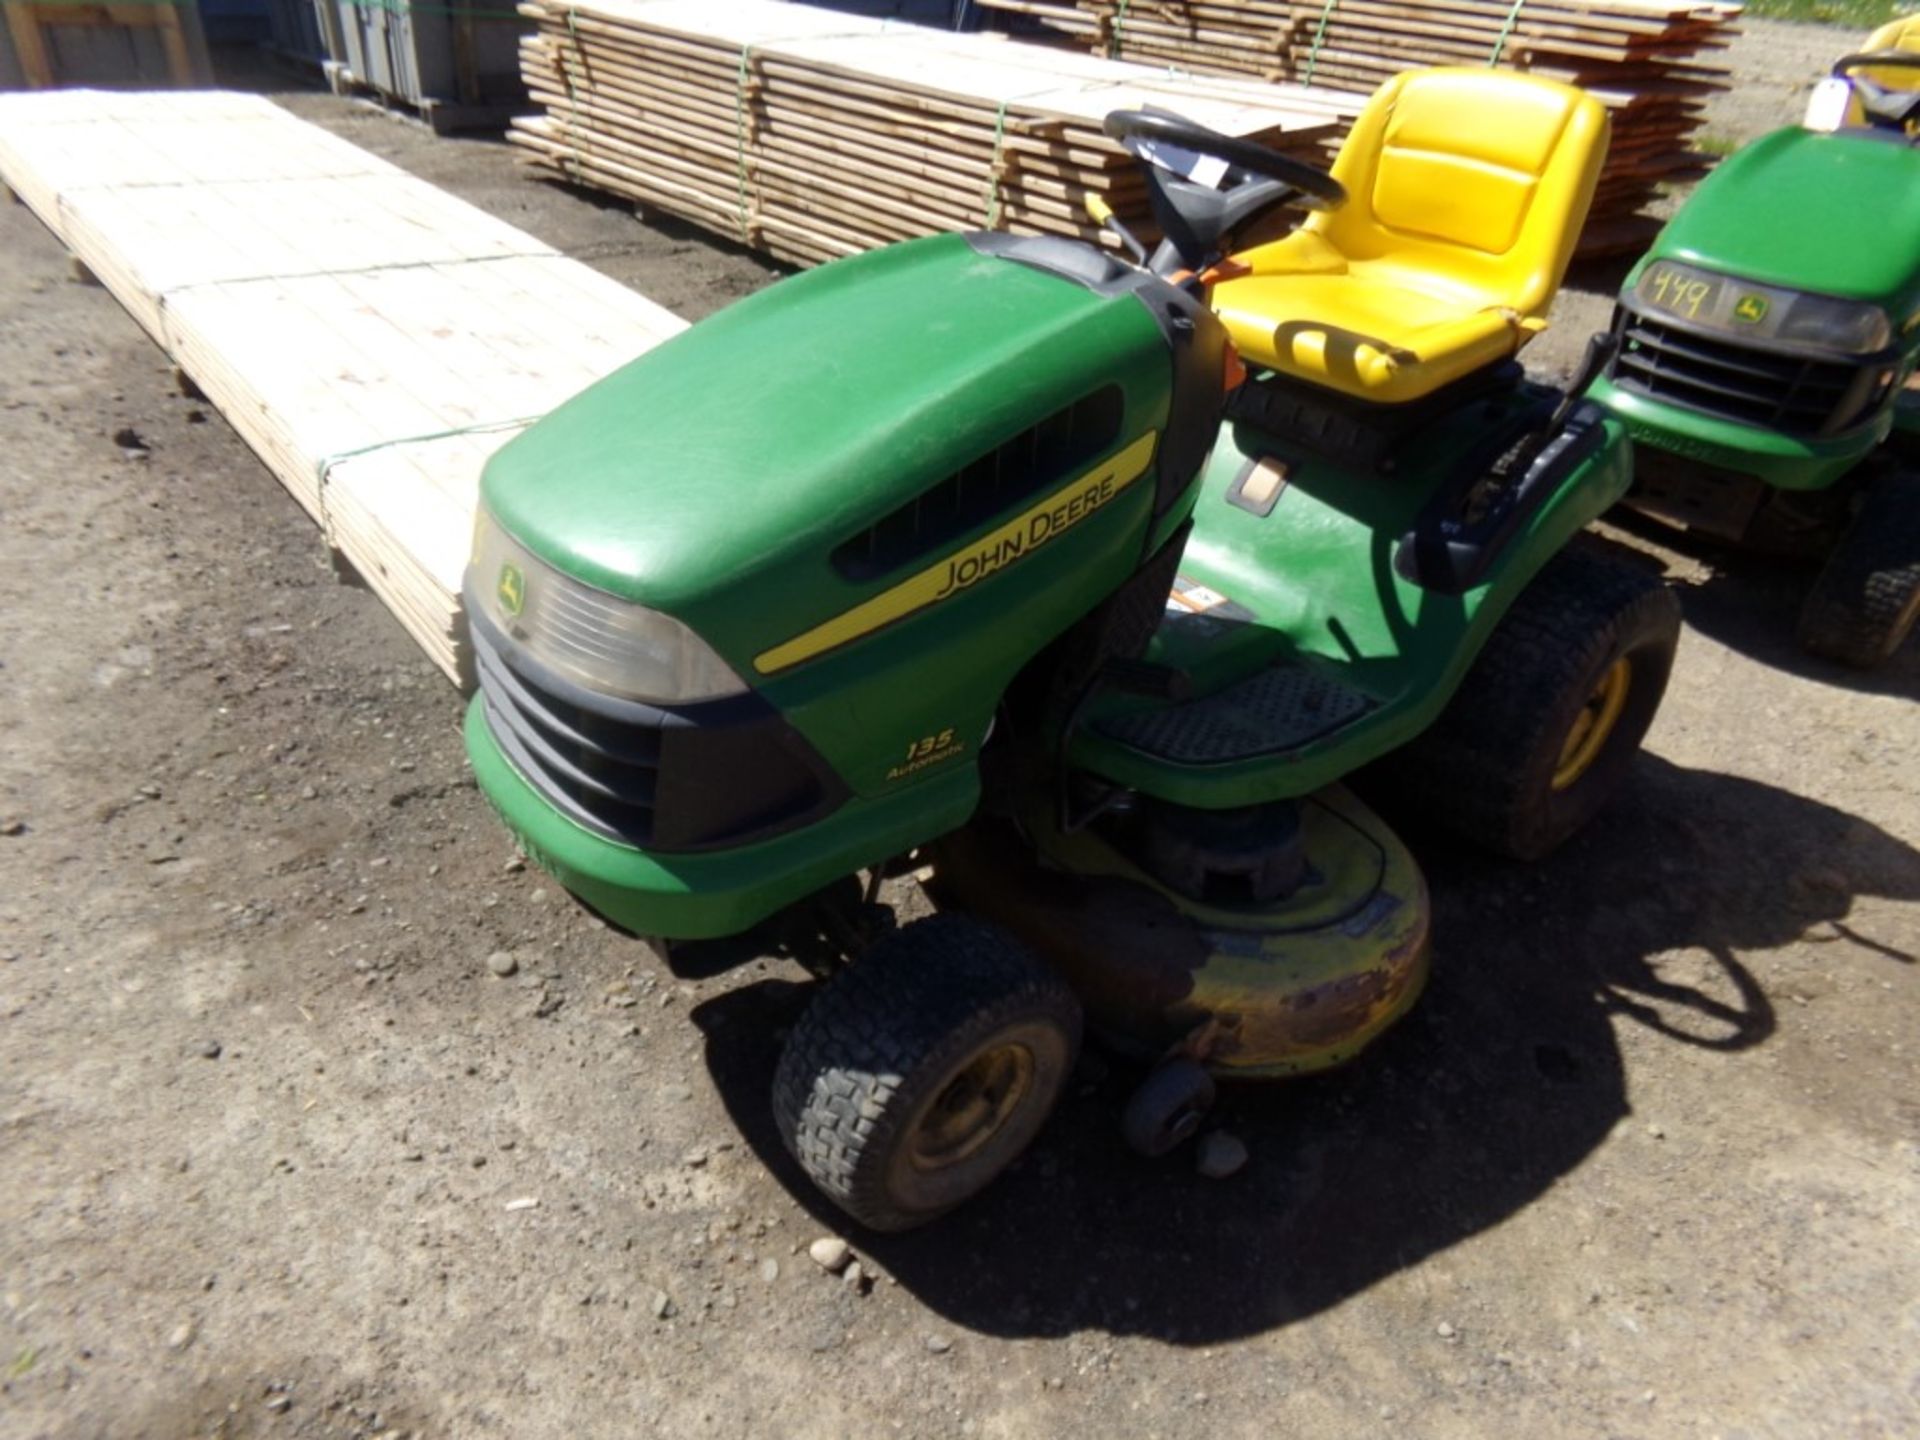 John Deere 135 Automatic with 42'' Deck, 22 HP Briggs Engine, 610 Hrs. 1 DECK SPINDLE SEIZED